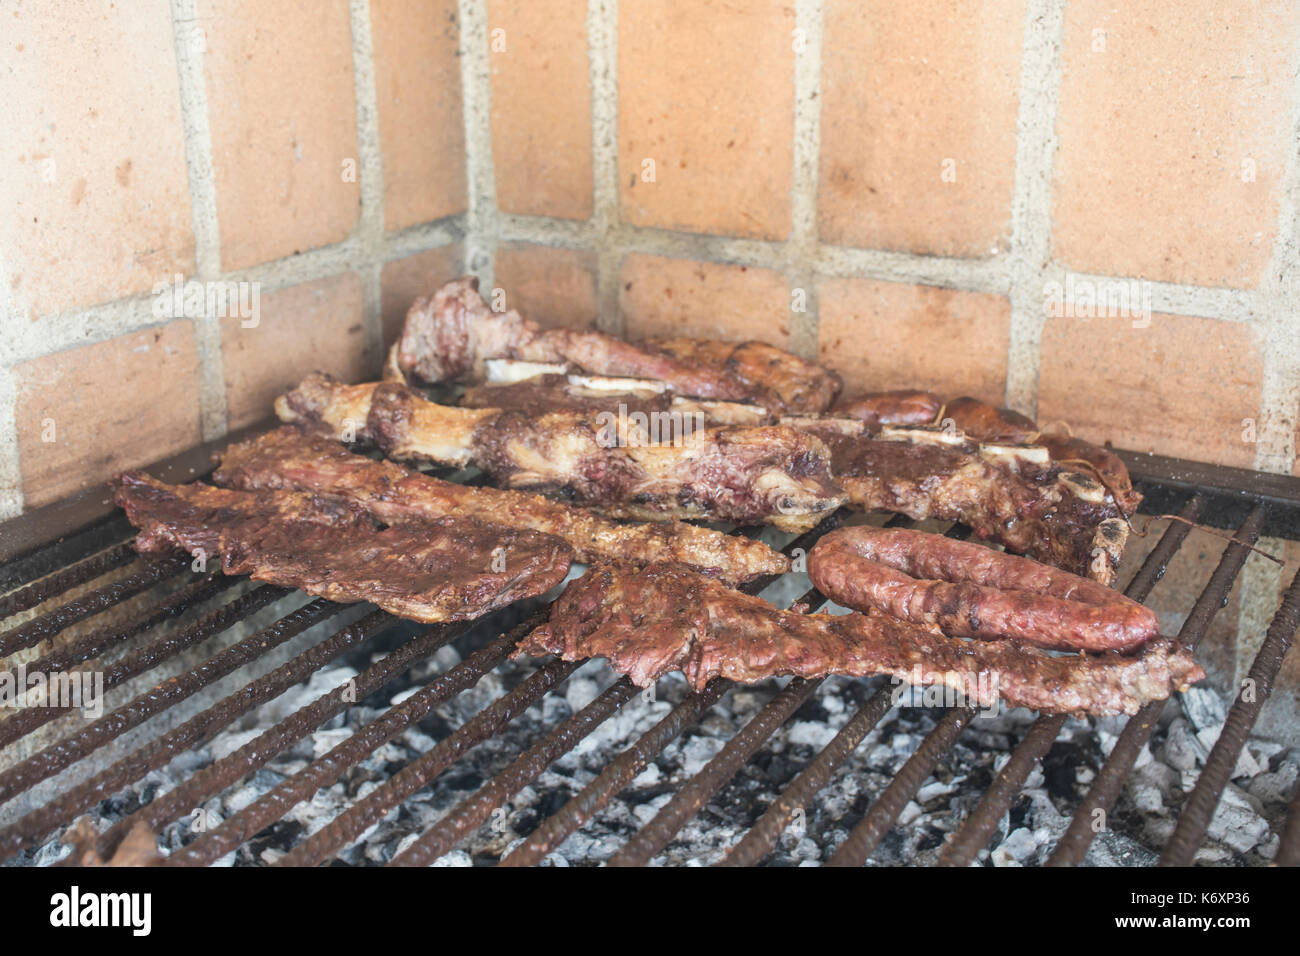 Traditional argentine barbecue or asado. Buenos Aires, Argentina Stock Photo